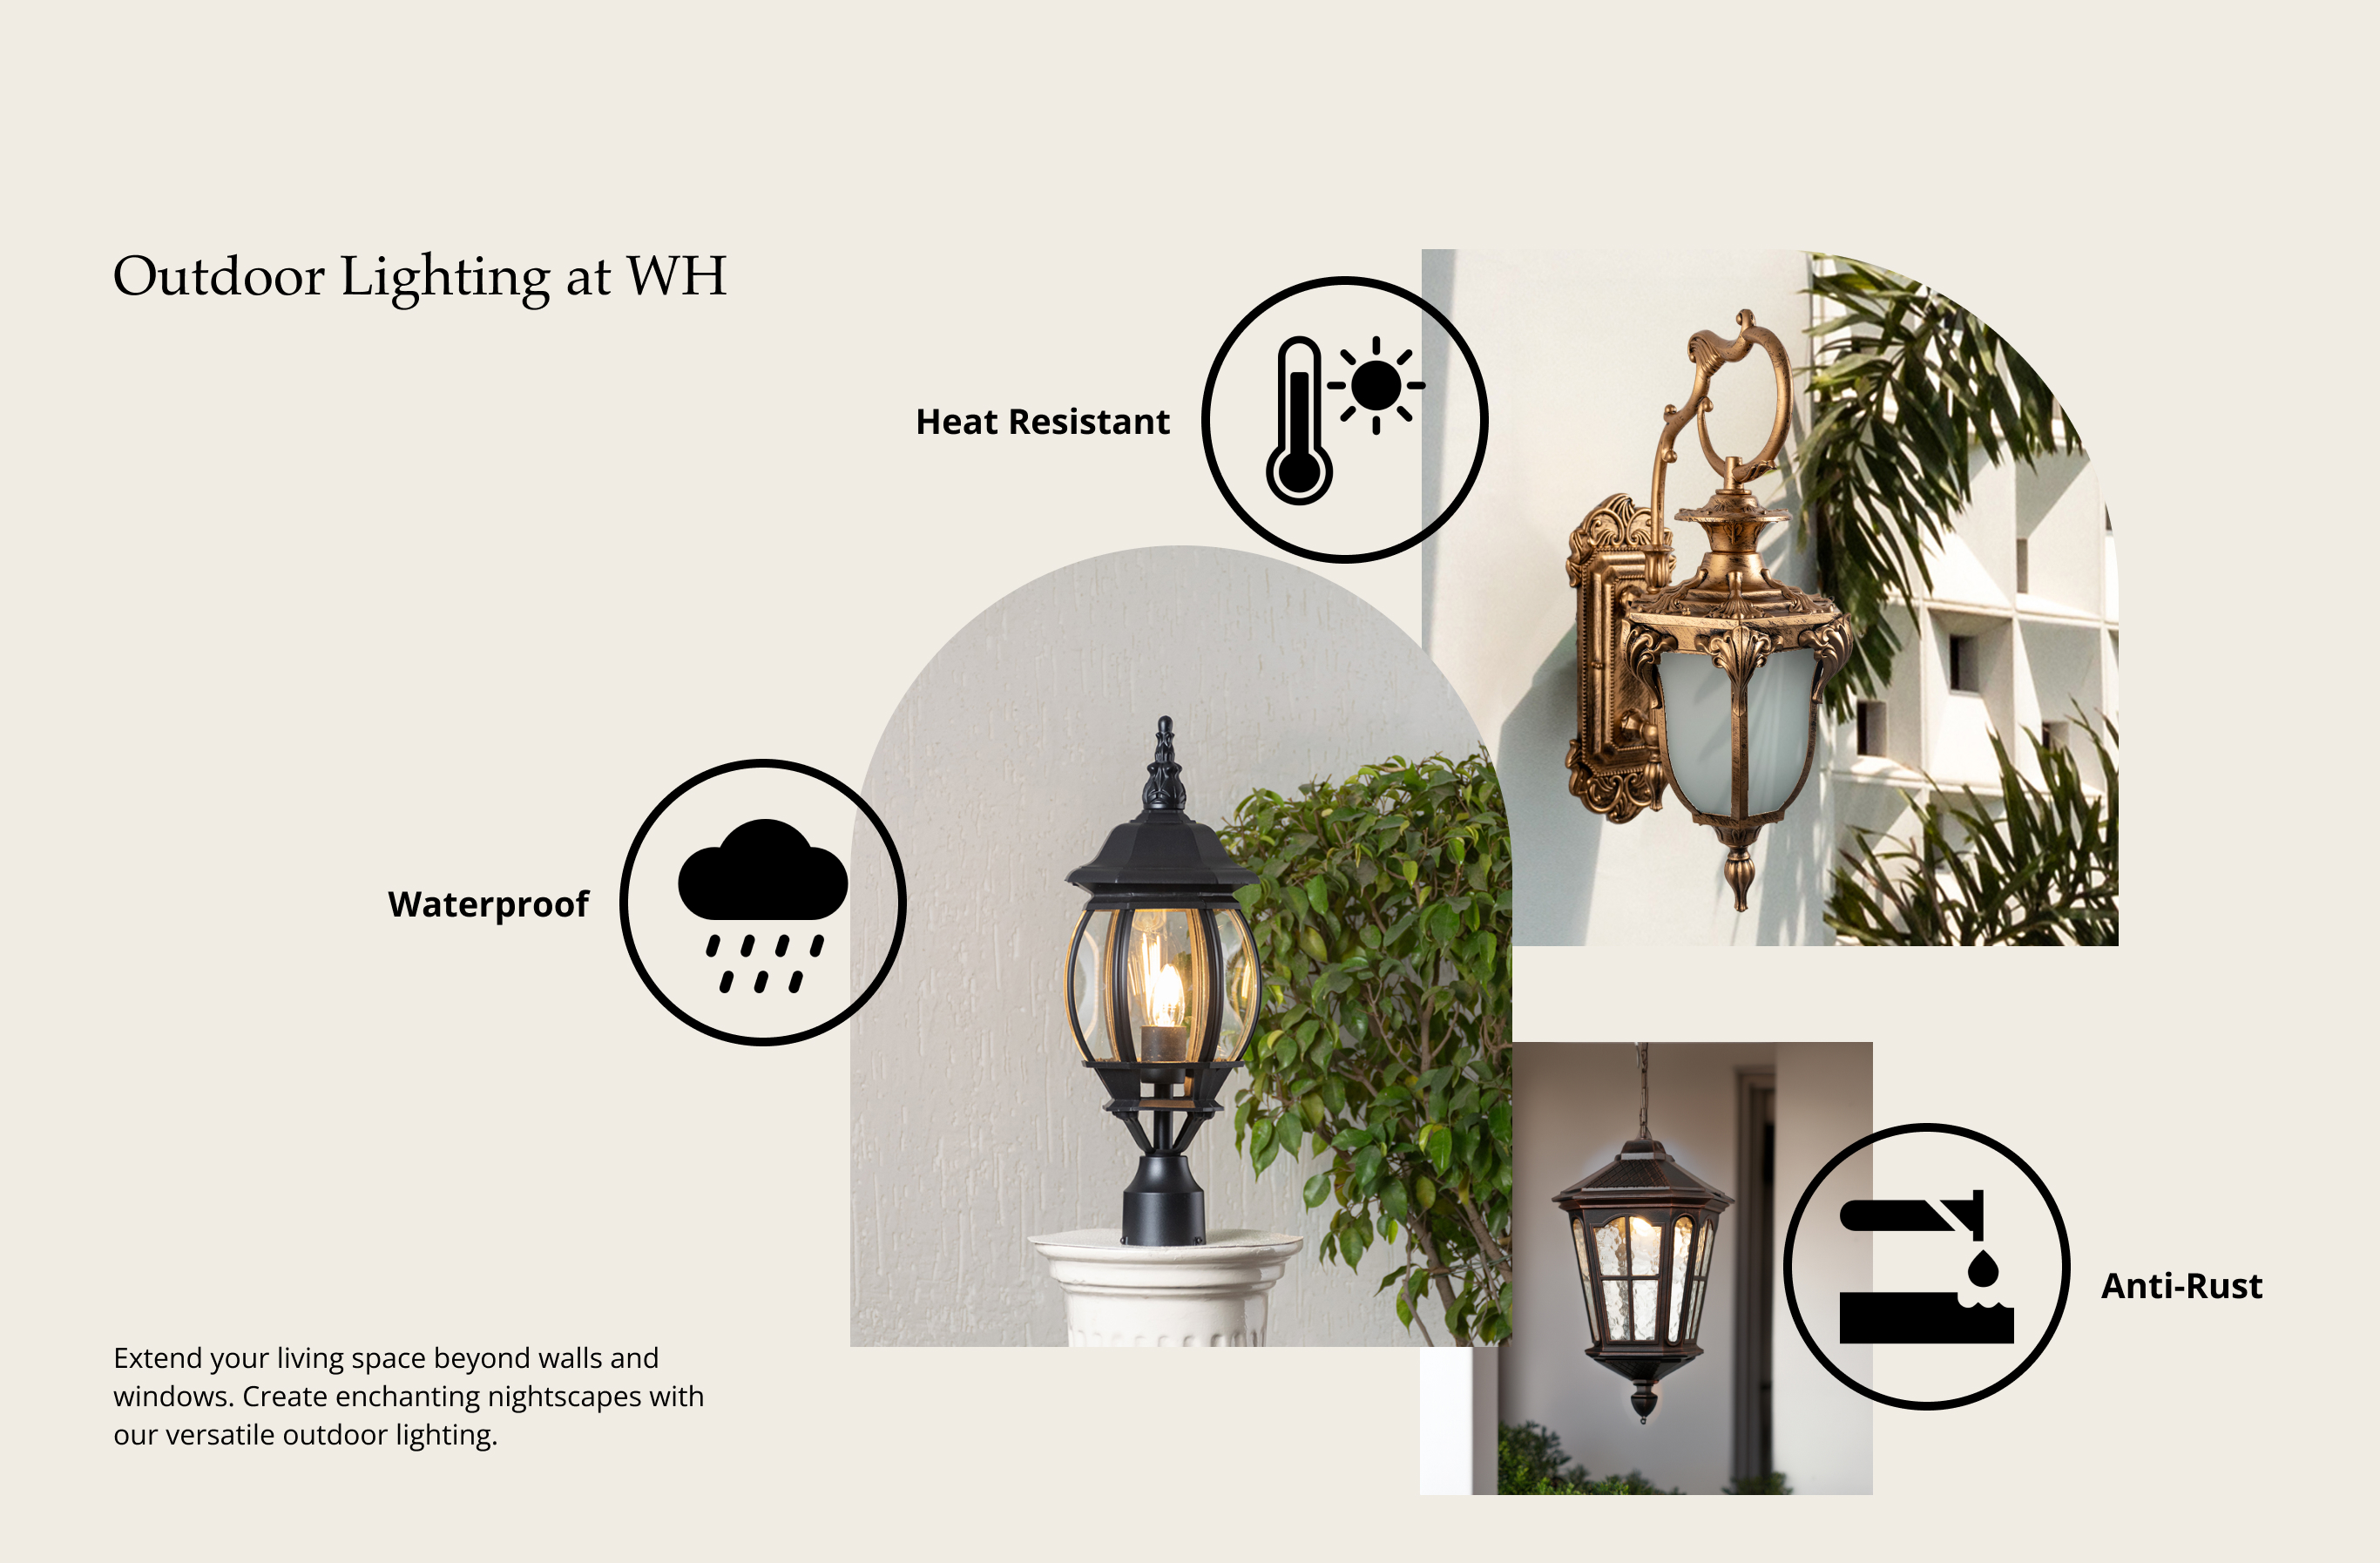 Outdoor_lighting_at_WH.jpg